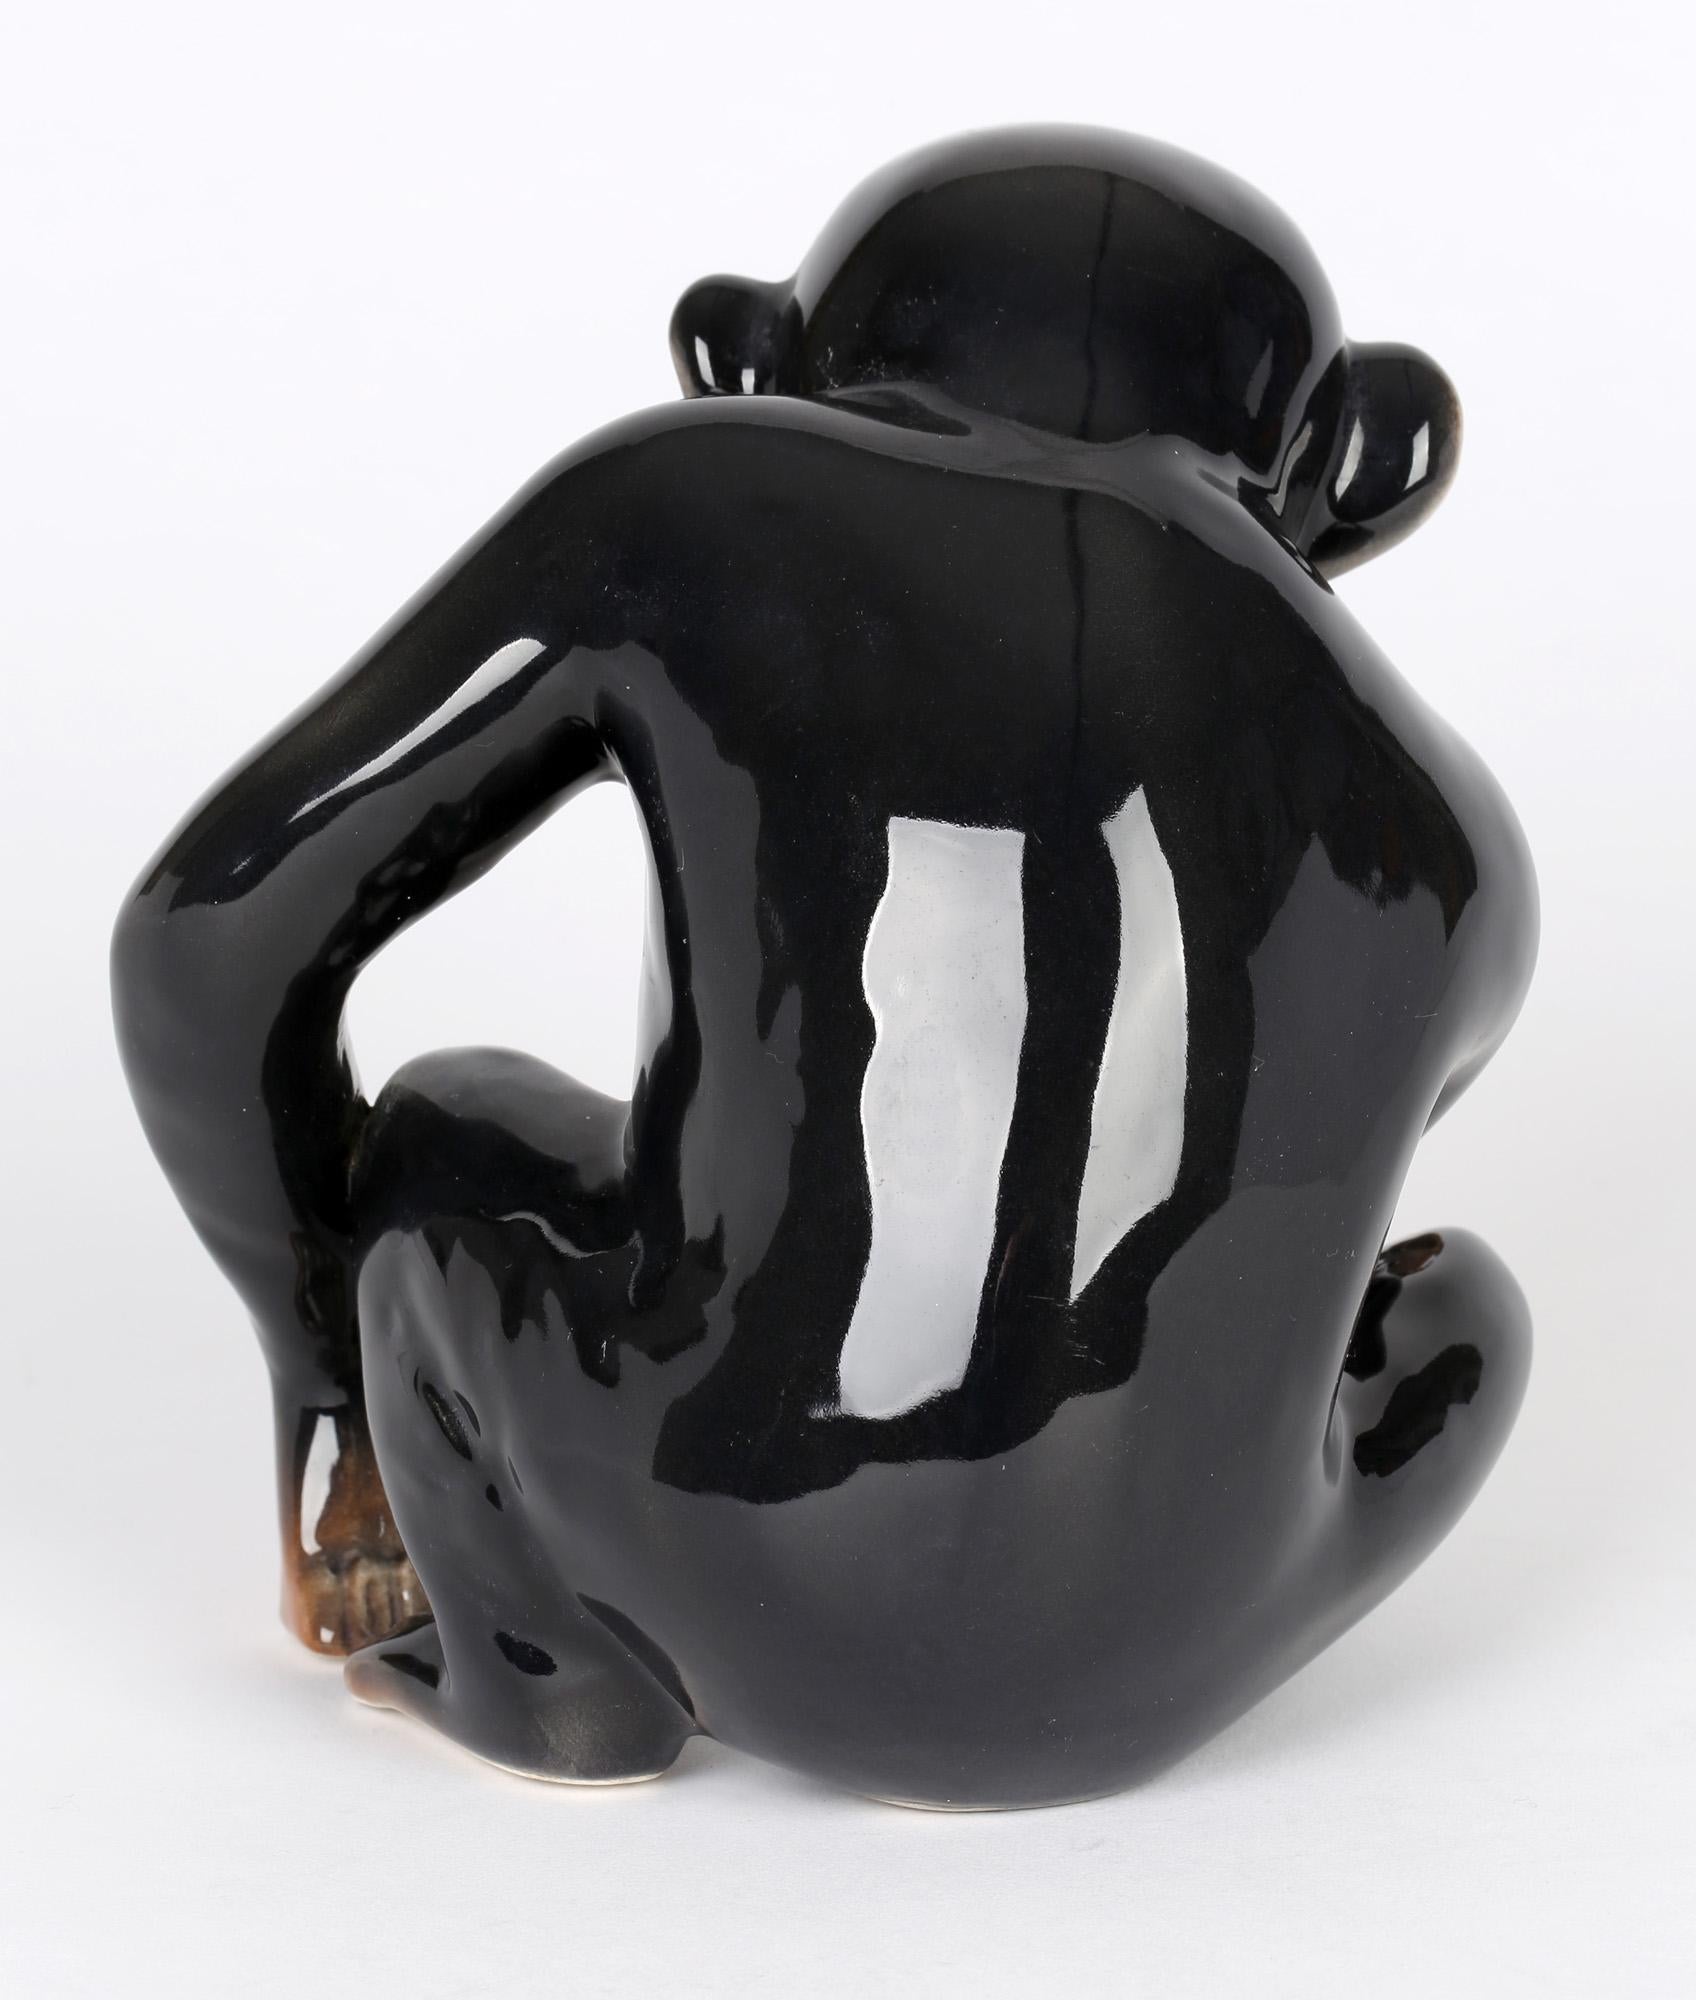 A charming and well modeled Art Deco pottery of a chimpanzee made in England by Sylvac and dating from around 1940/50. The chimpanzee sits on its hind legs and holds a carrot in one hand while resting the other on the ground and appears to be